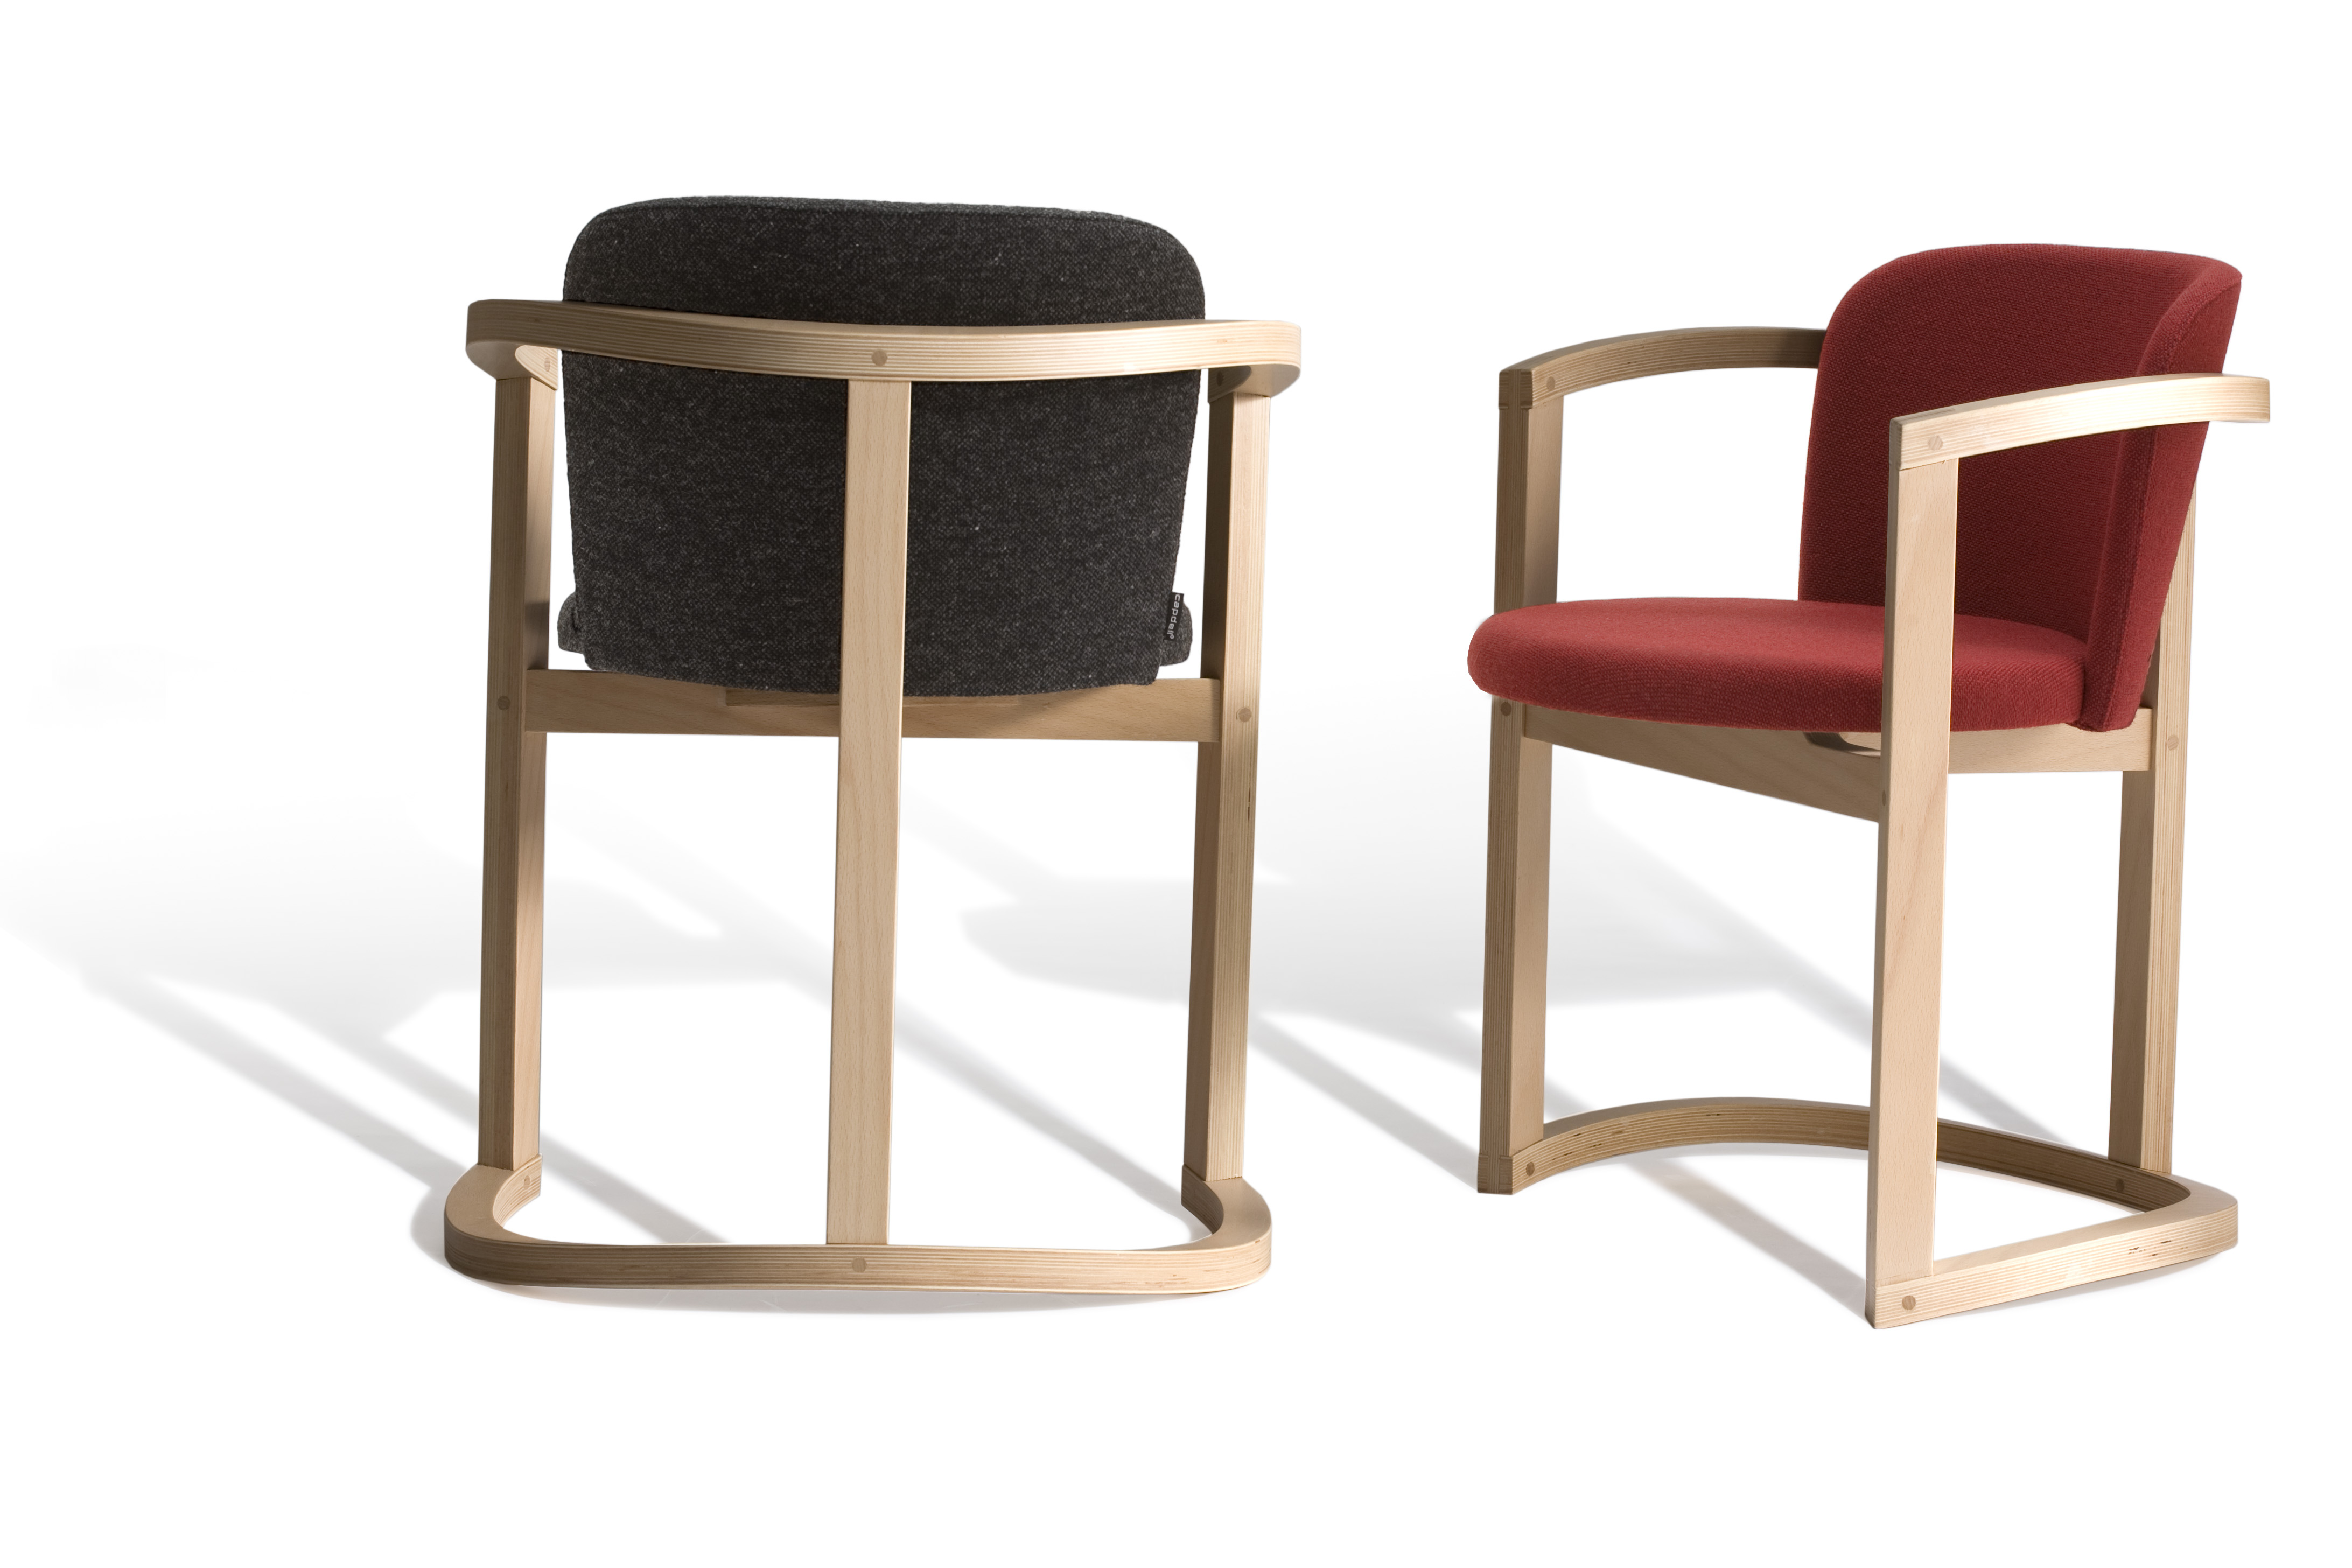 STIR chairs by Kazuko Okamoto for CAPDELL. Red Dot Award 2016